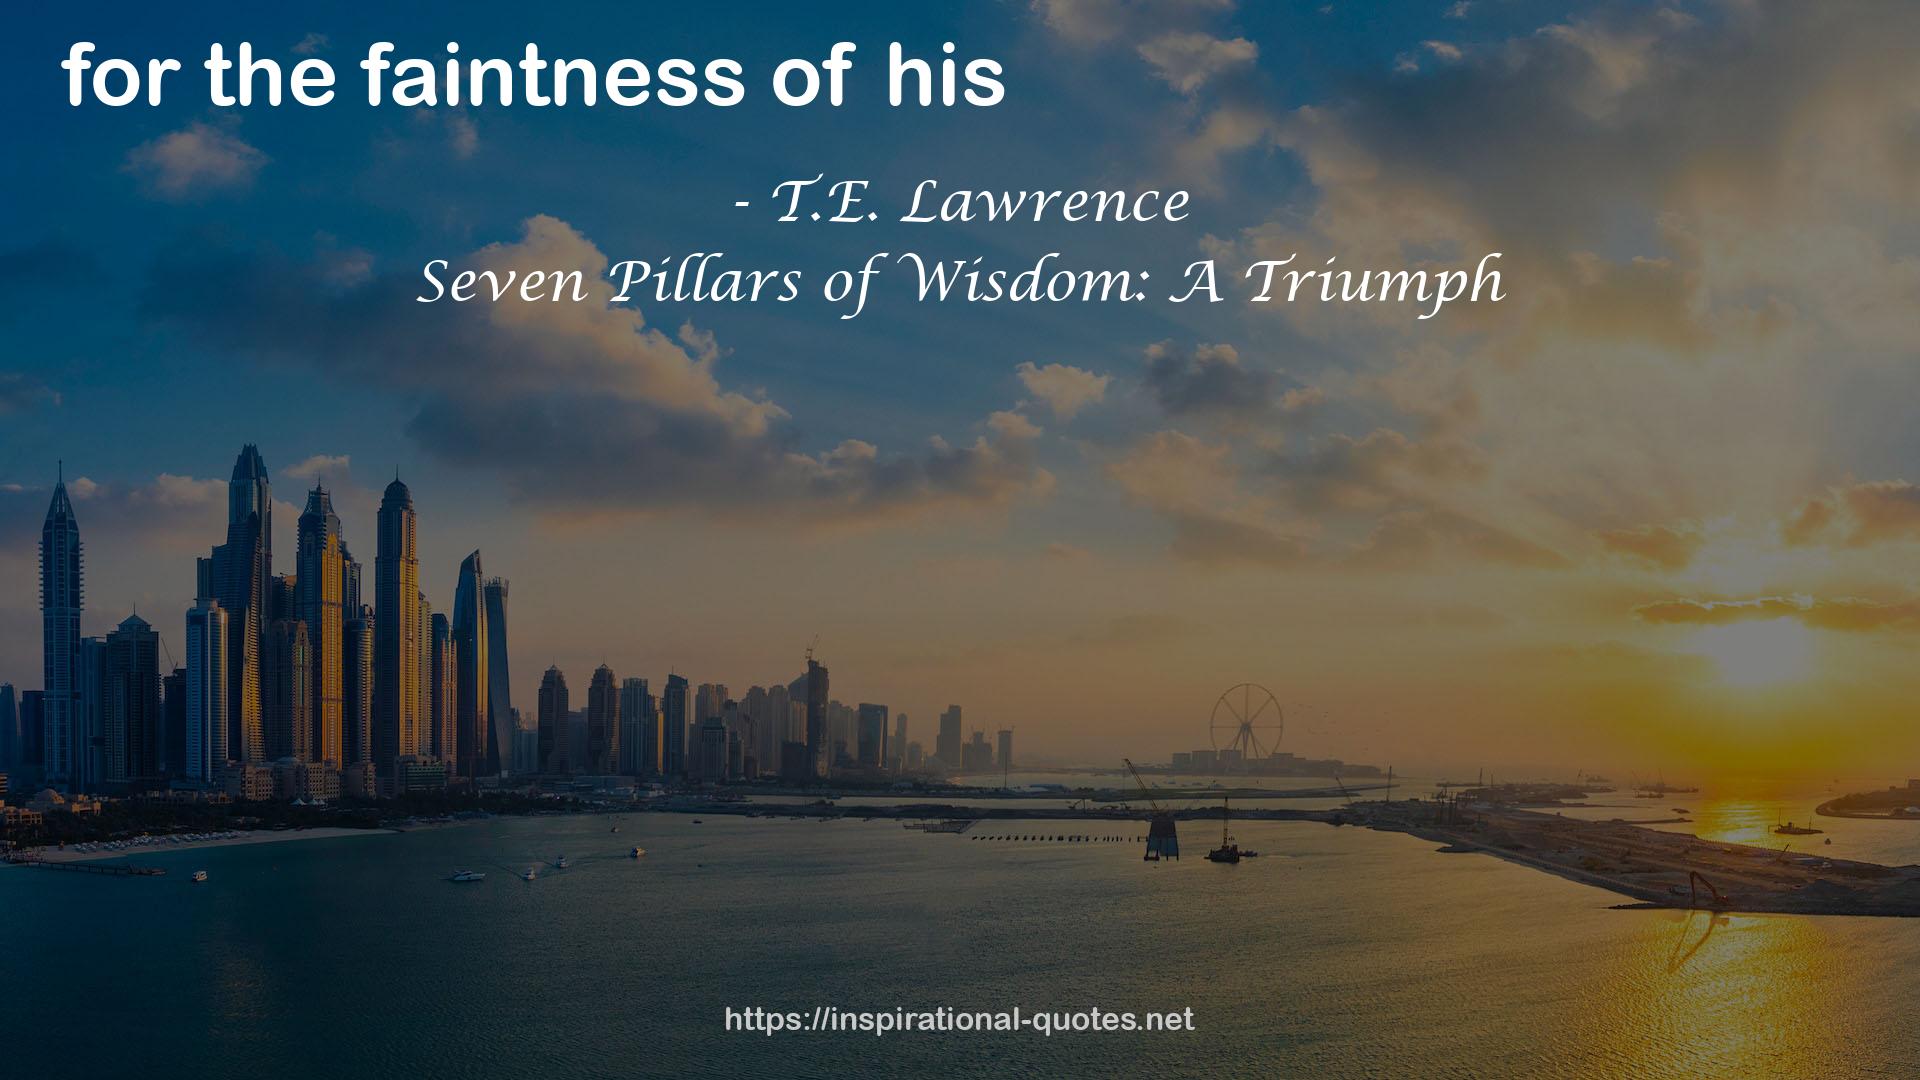 T.E. Lawrence QUOTES